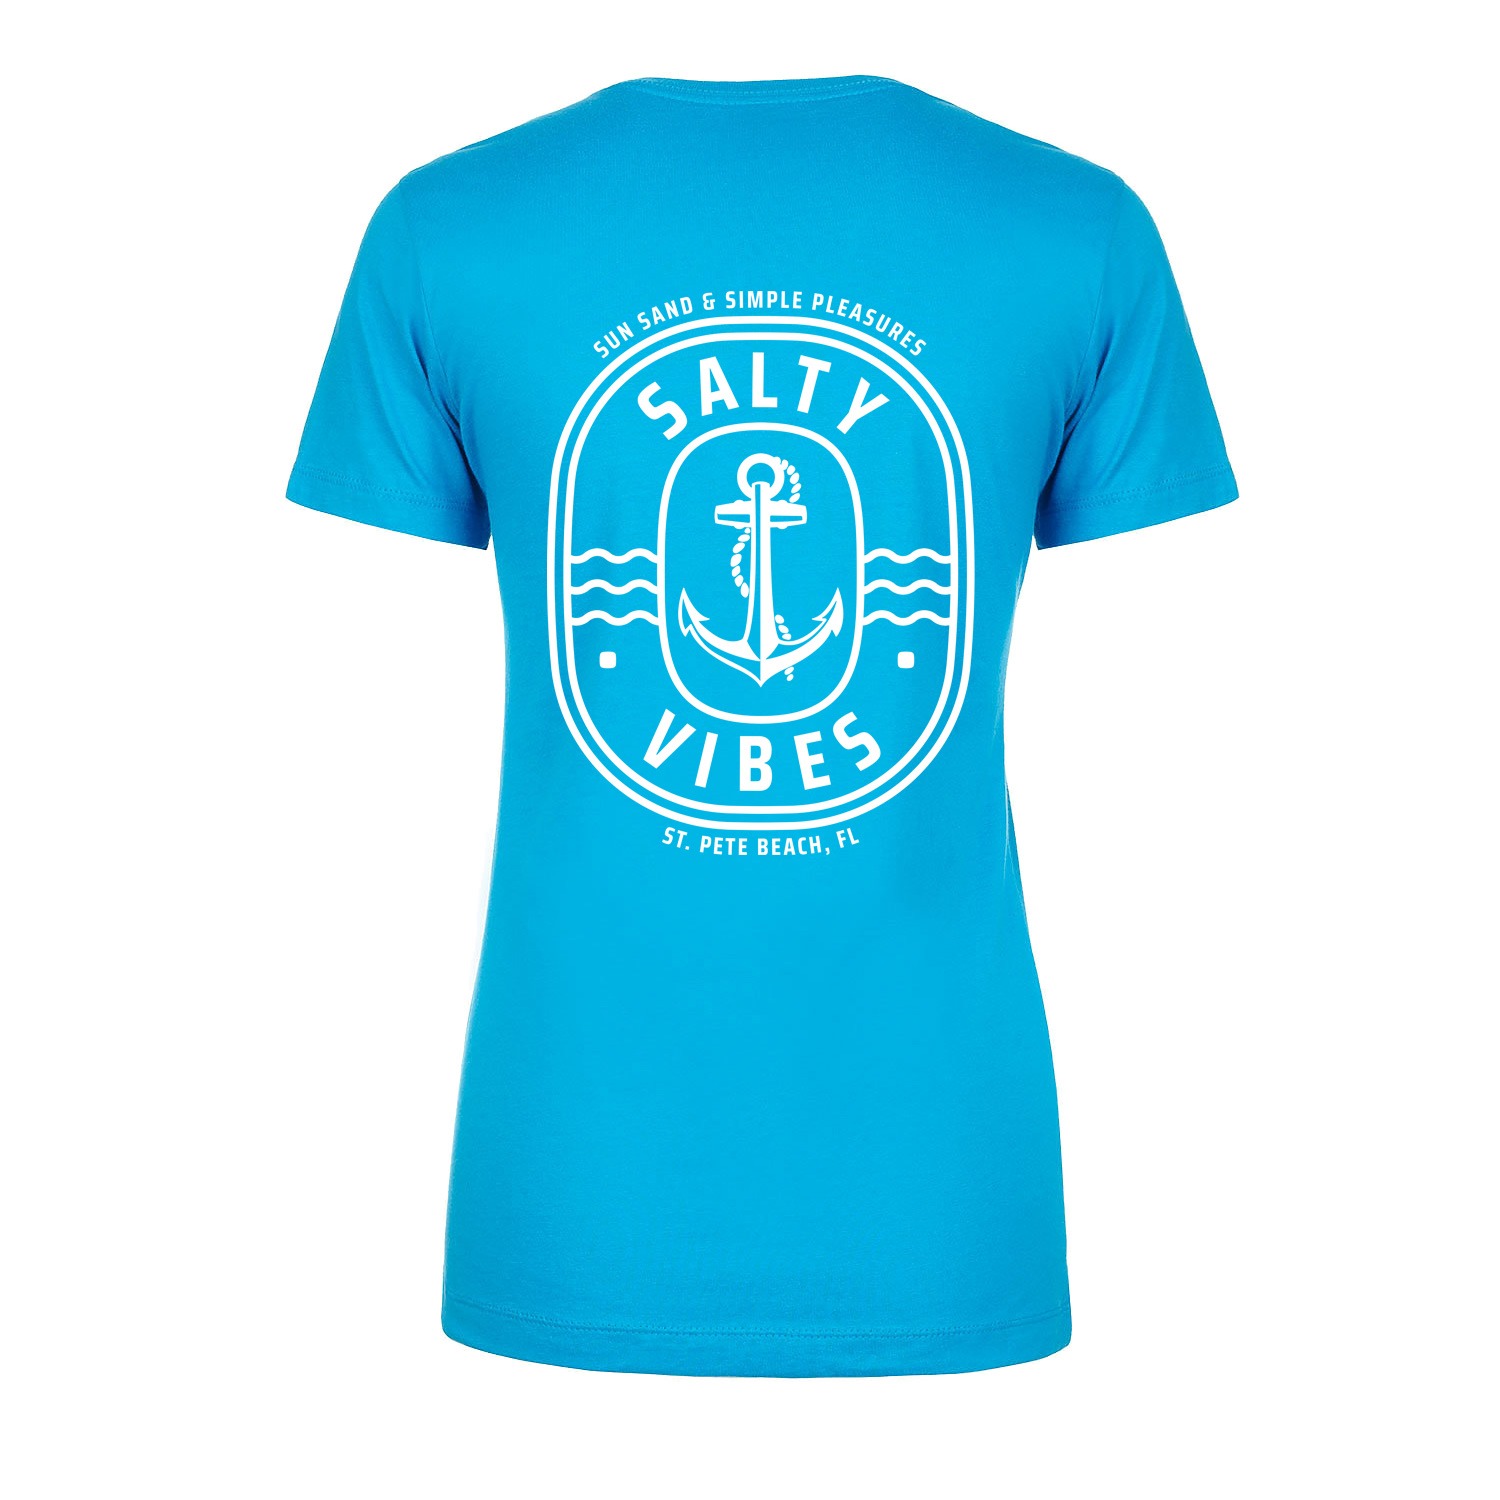 Salty Vibes Anchor Women's Fitted T-shirt - Turquoise, 2XL